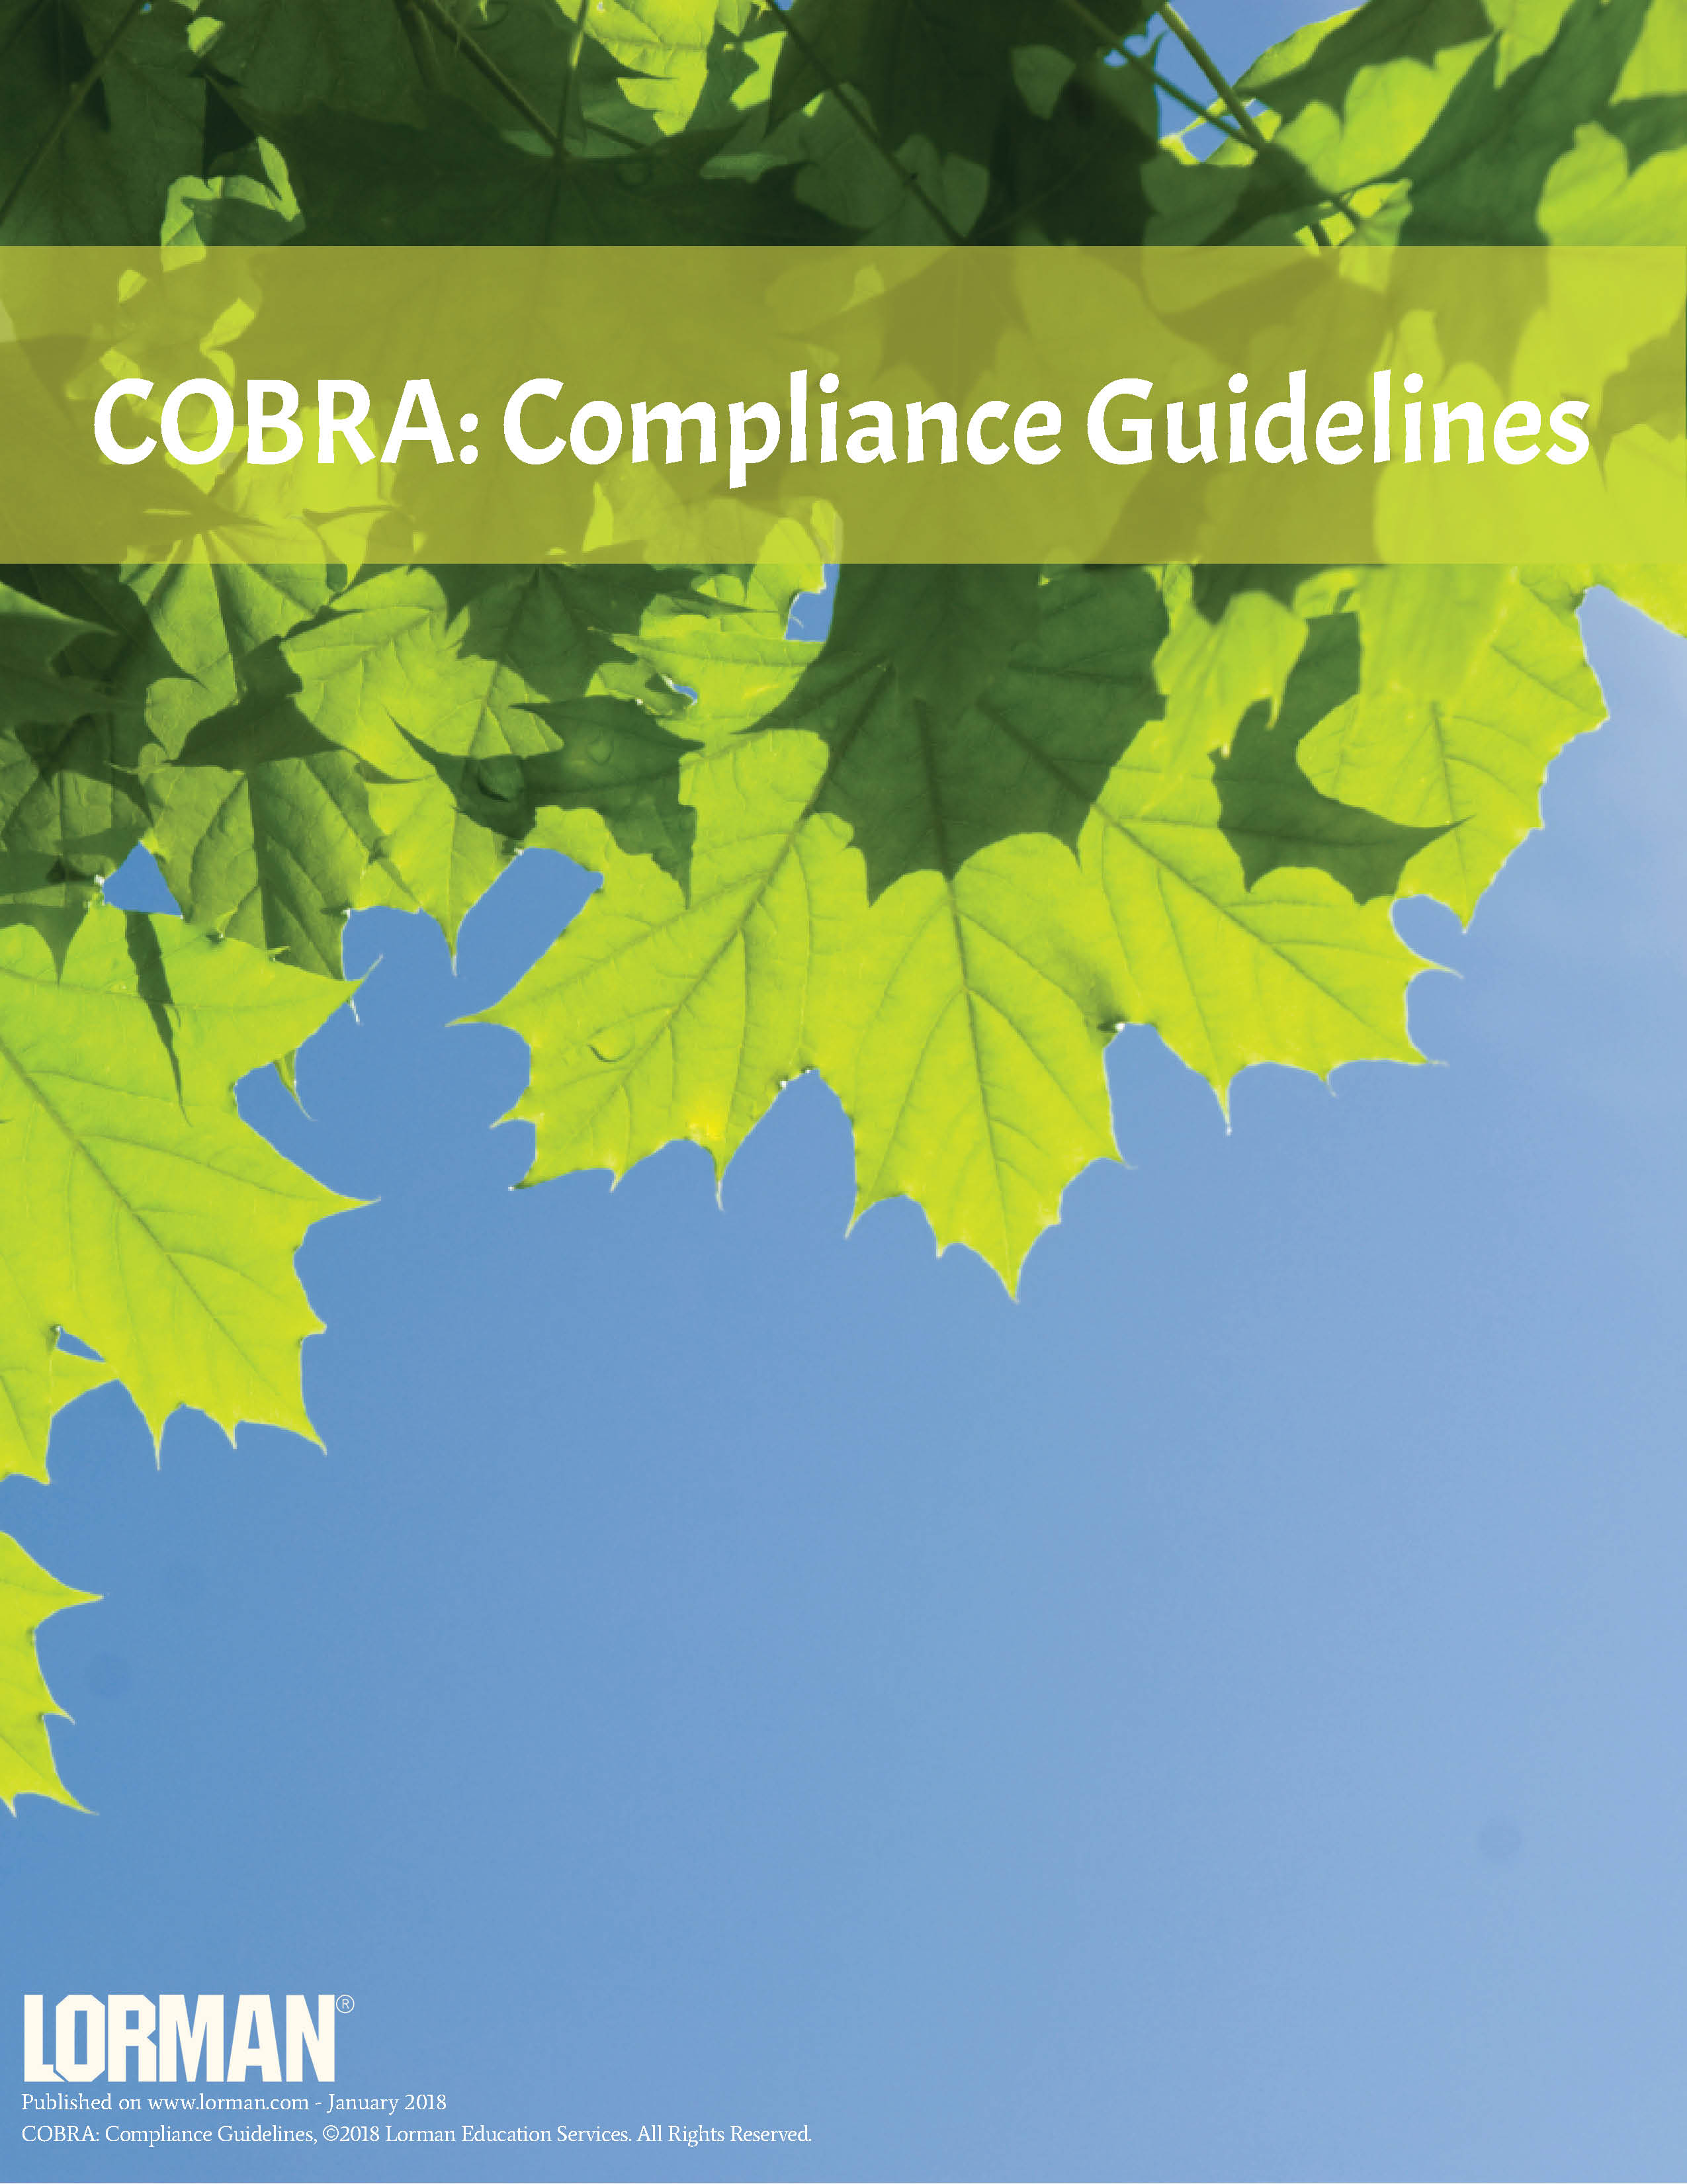 COBRA: Compliance Guidelines